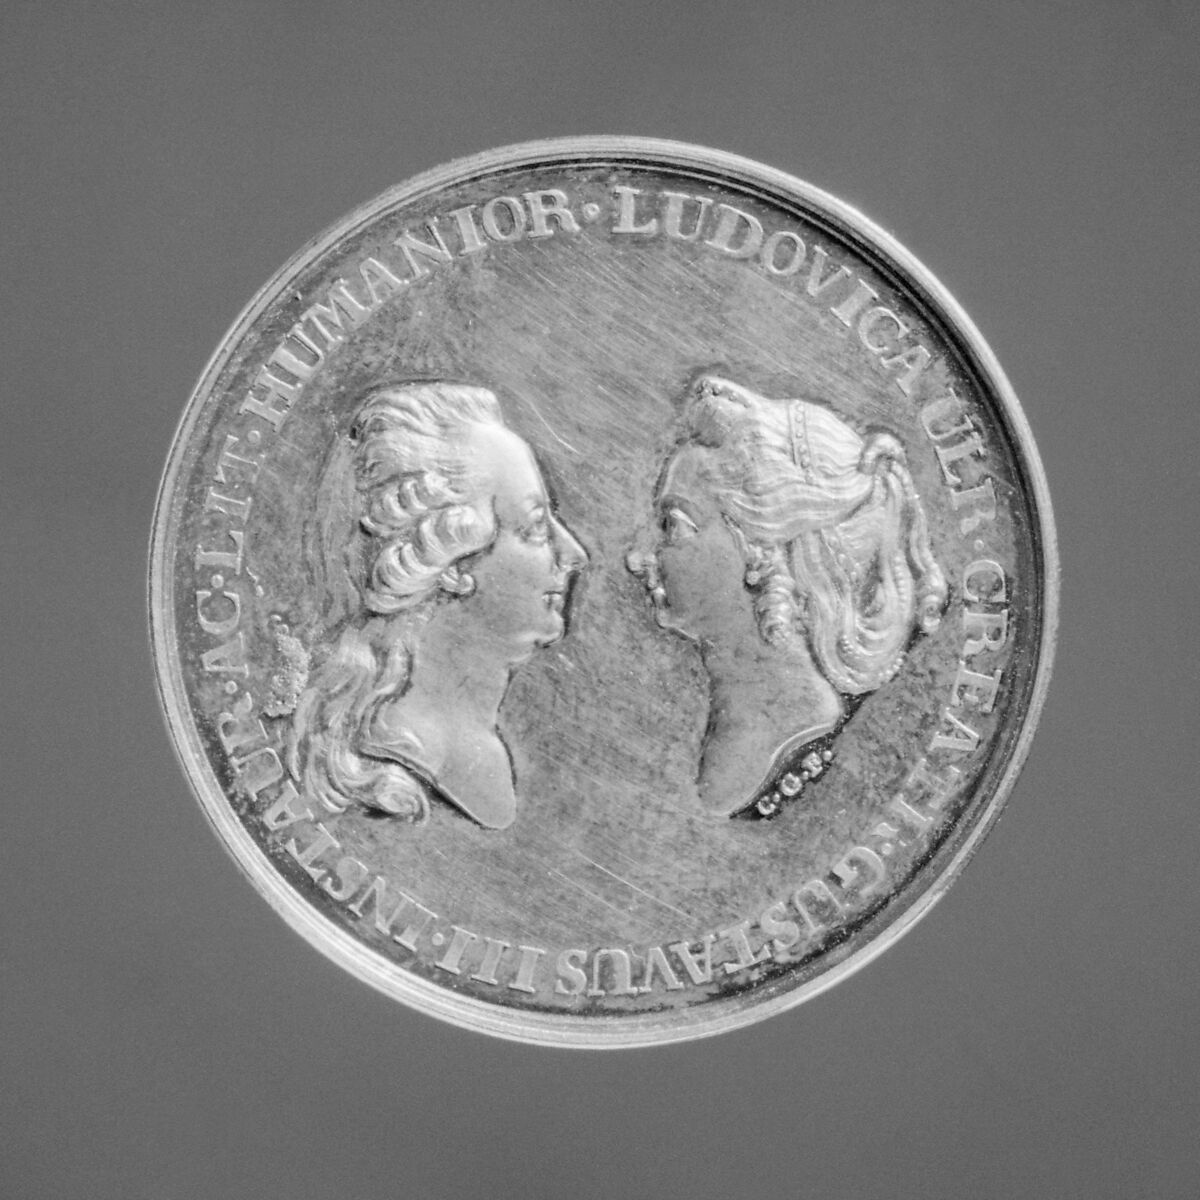 Gustavus III, King of Sweden (b. 1746, r. 1771–92) and Louise Ulrika, his mother (1720–1782), as founders of the Swedish Academy, Medalist: Carl Gustaf Fehrman (1746–1798), Silver, Swedish 